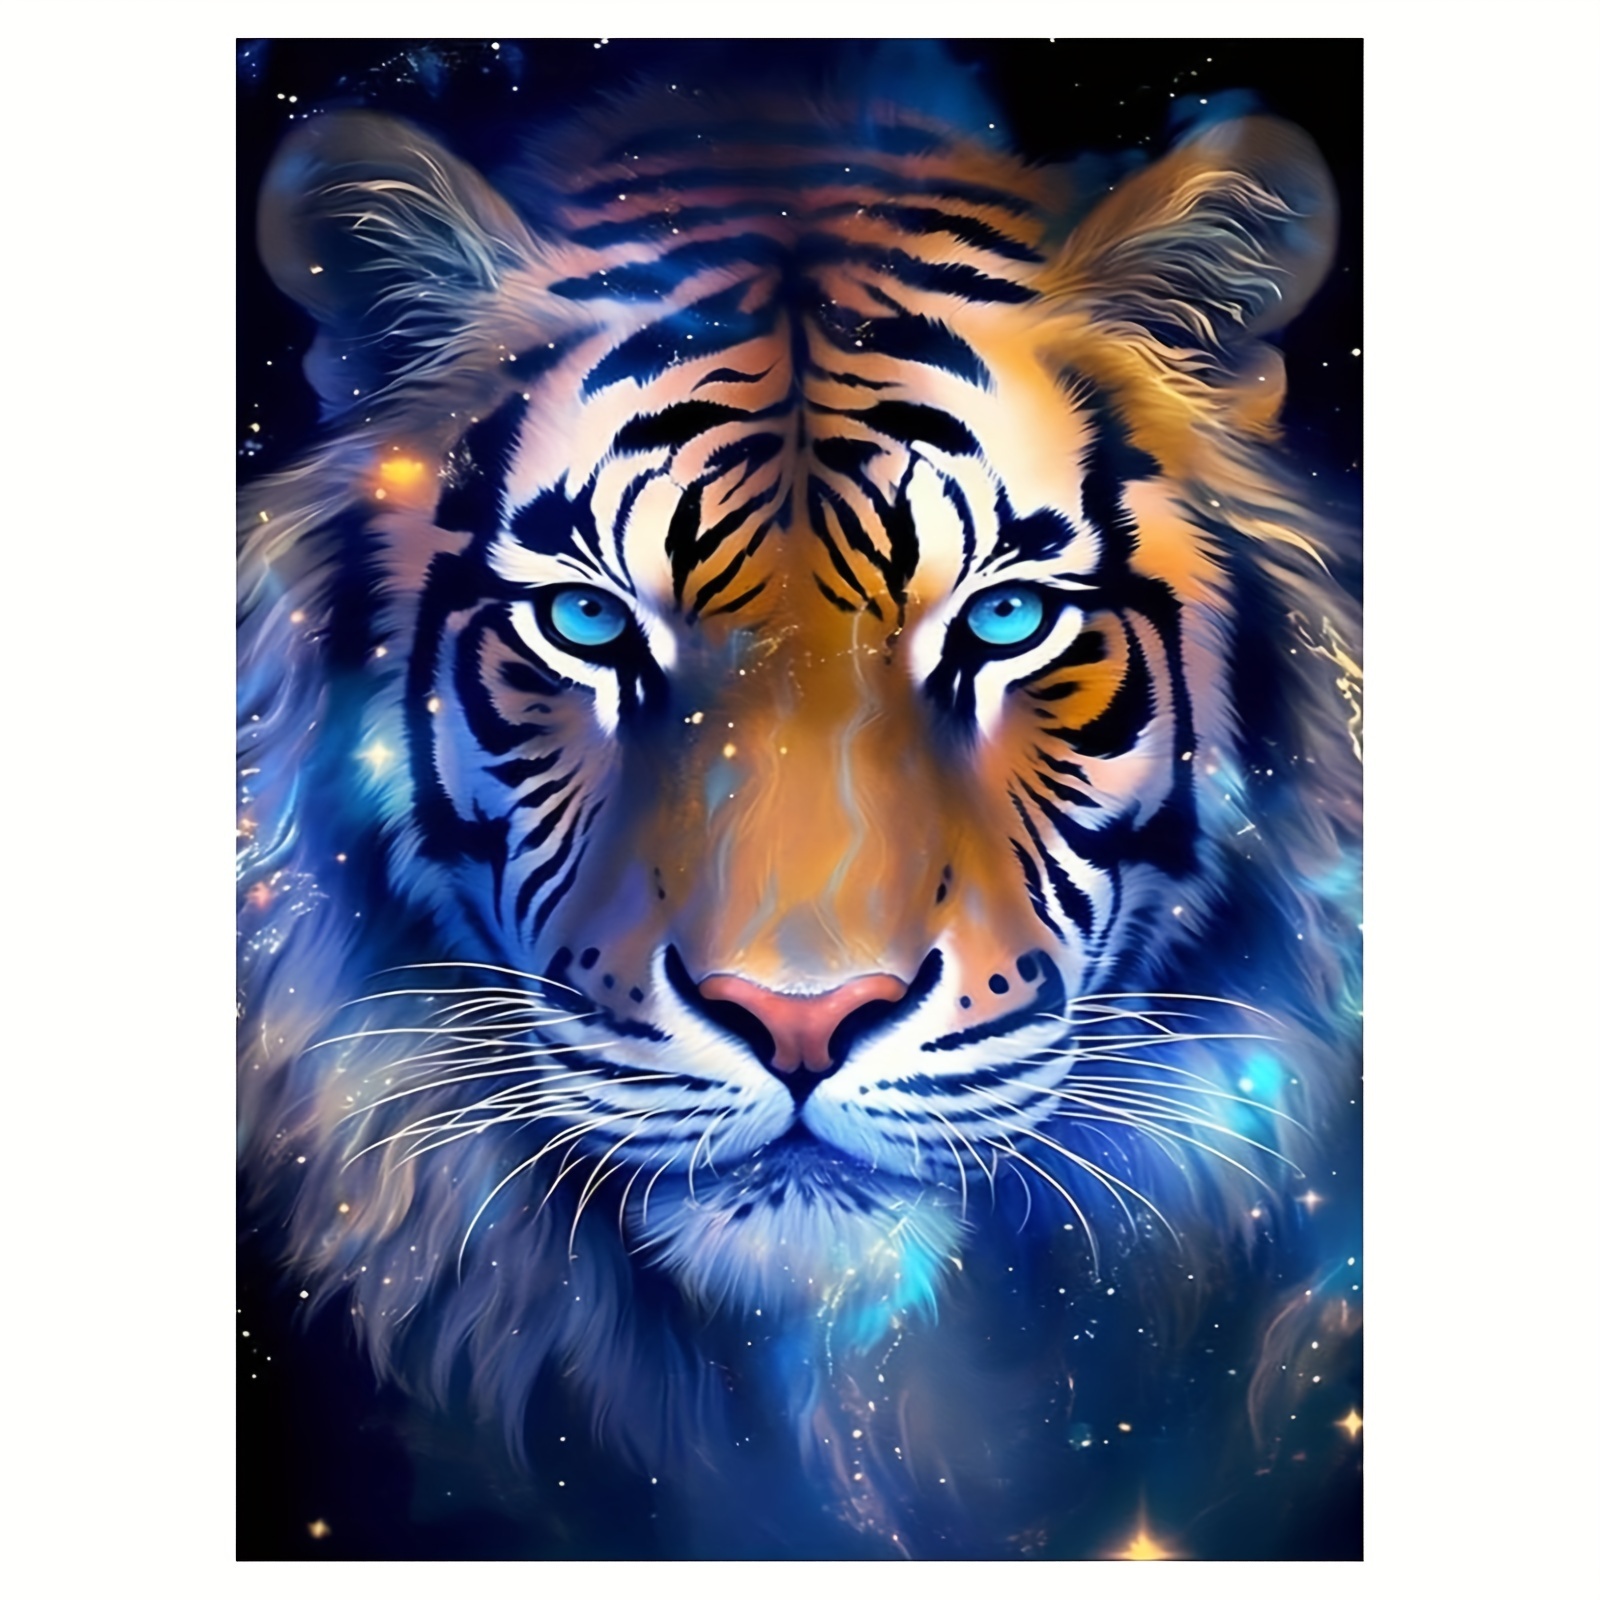 

Fluorescent Tiger Canvas Art Print, 12x16" - Frameless Wall Decor For Home, Office, Cafe | Vibrant Poster For Bedroom, Living Room, Kitchen